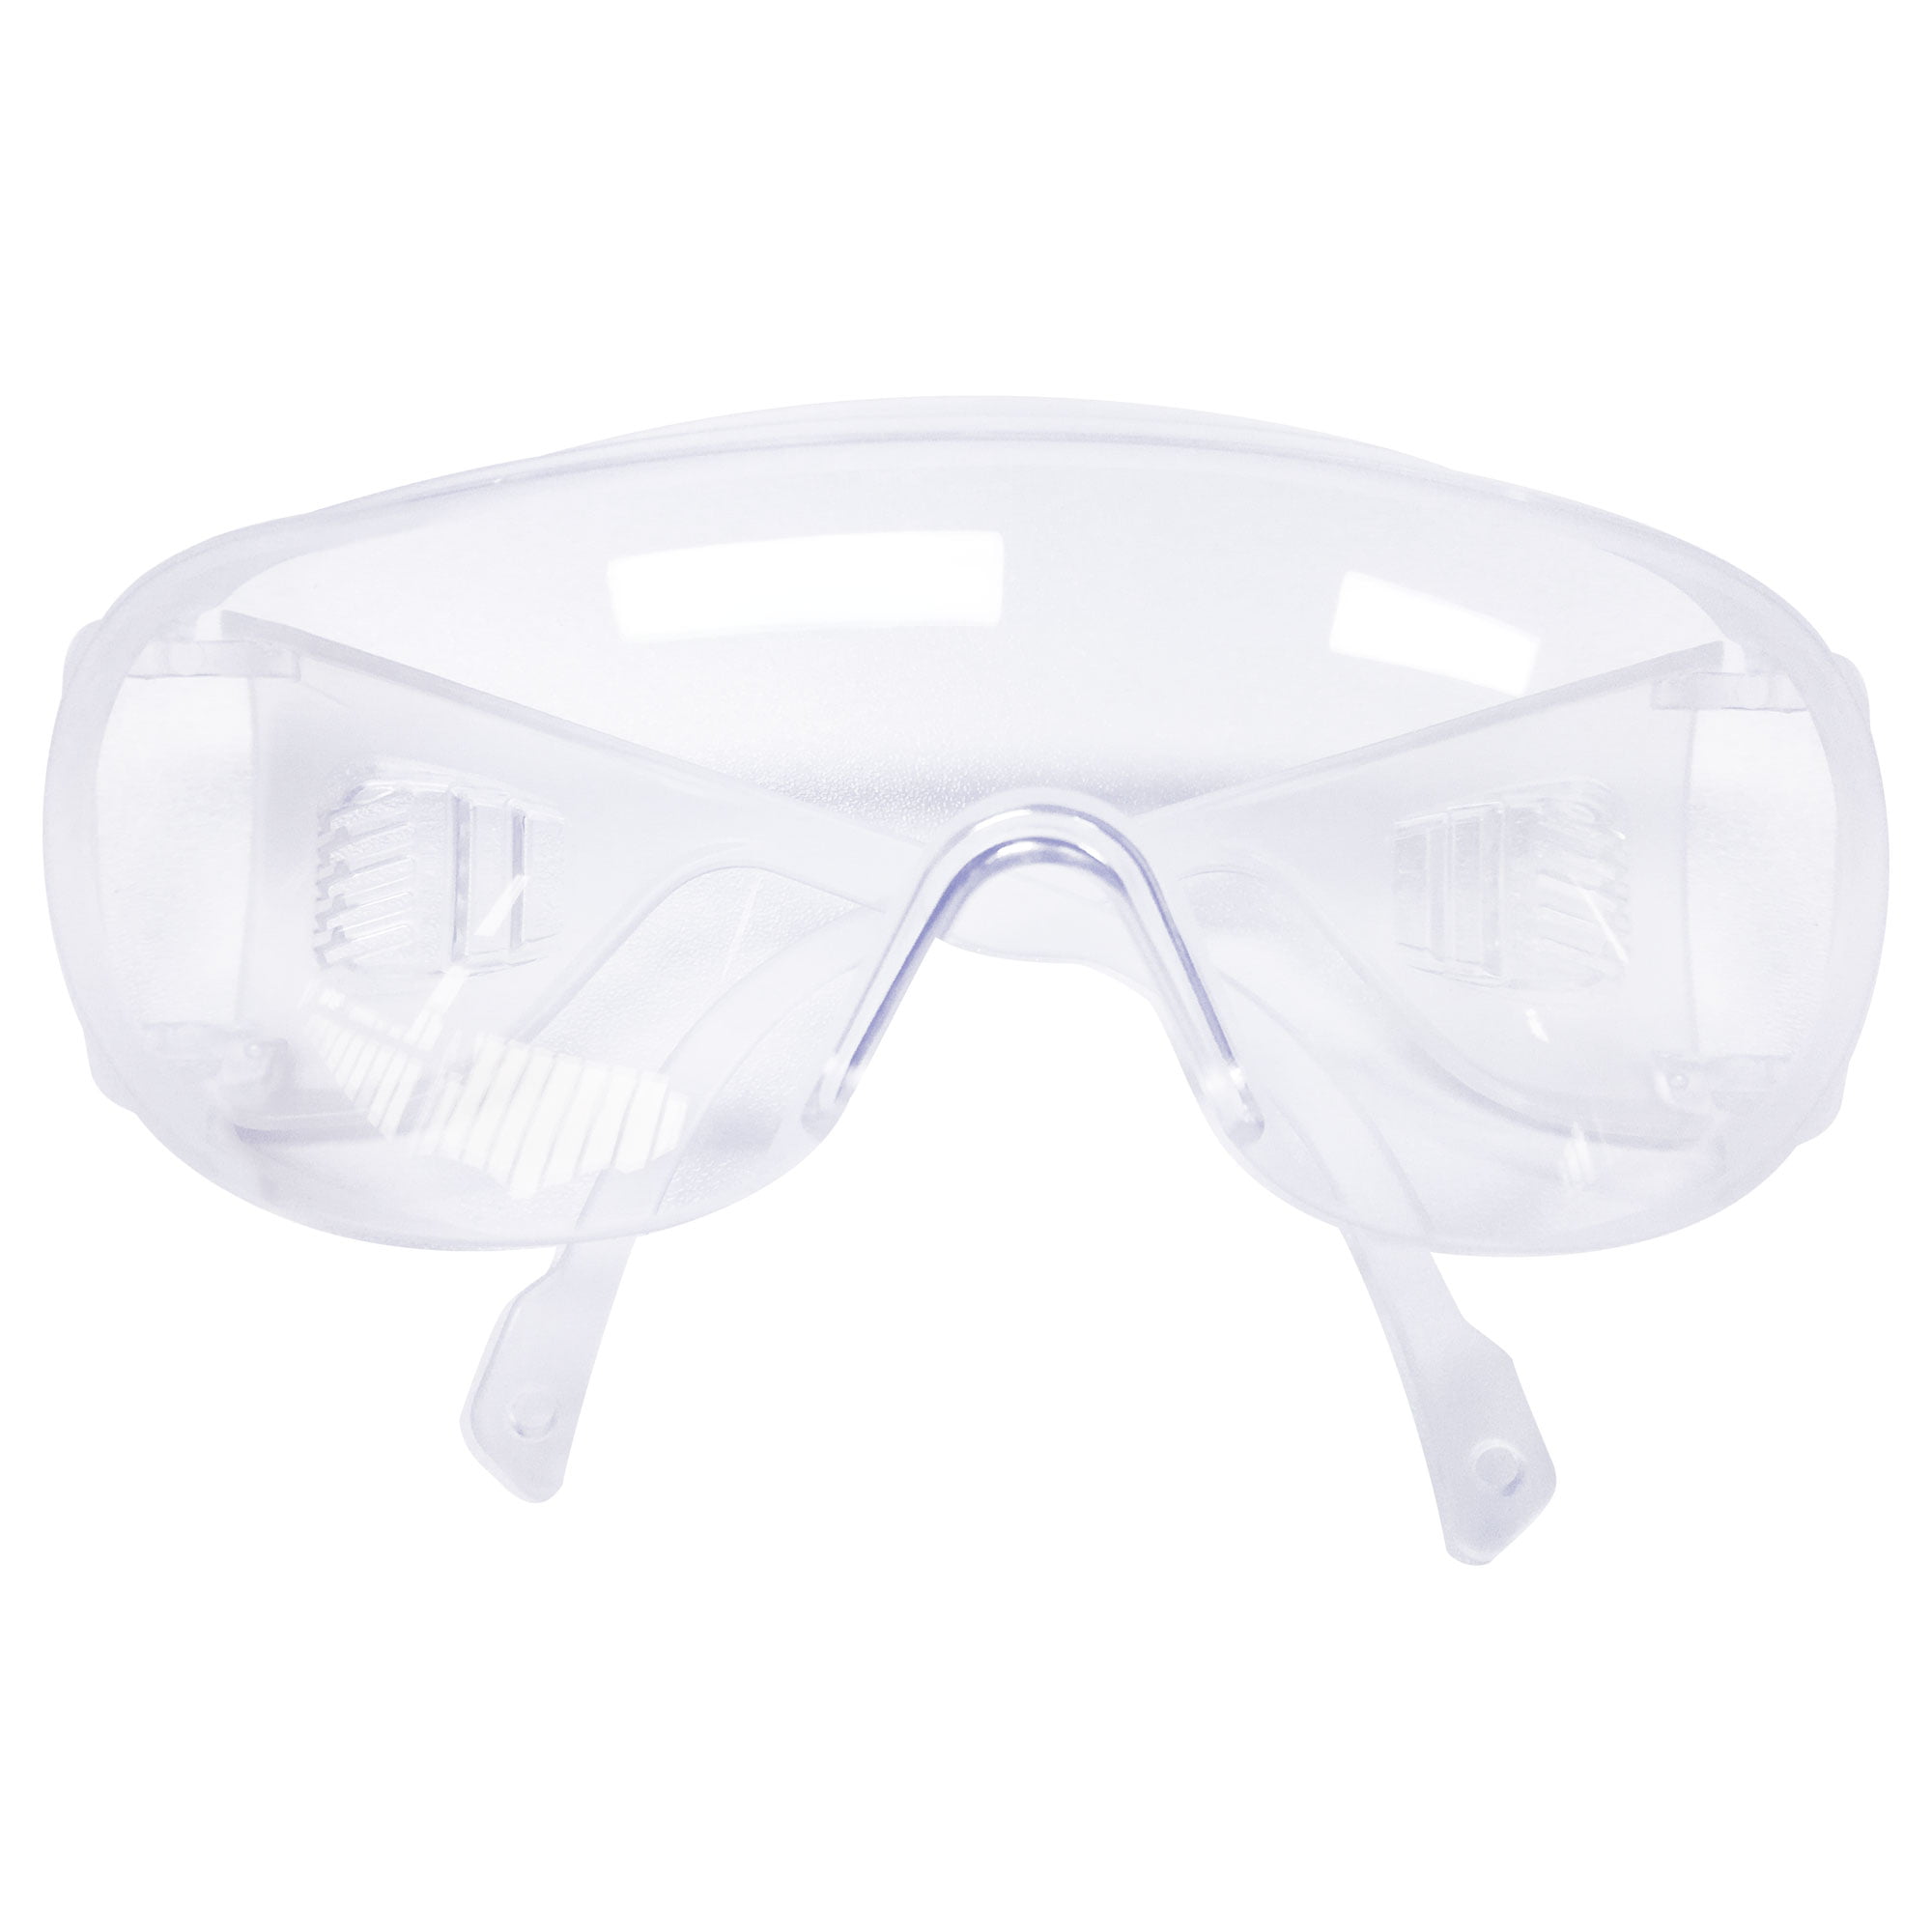 2x SAFETY GLASSES ANTI SCRATCH CLEAR LENS PPE EYEWEAR ONE SIZE 